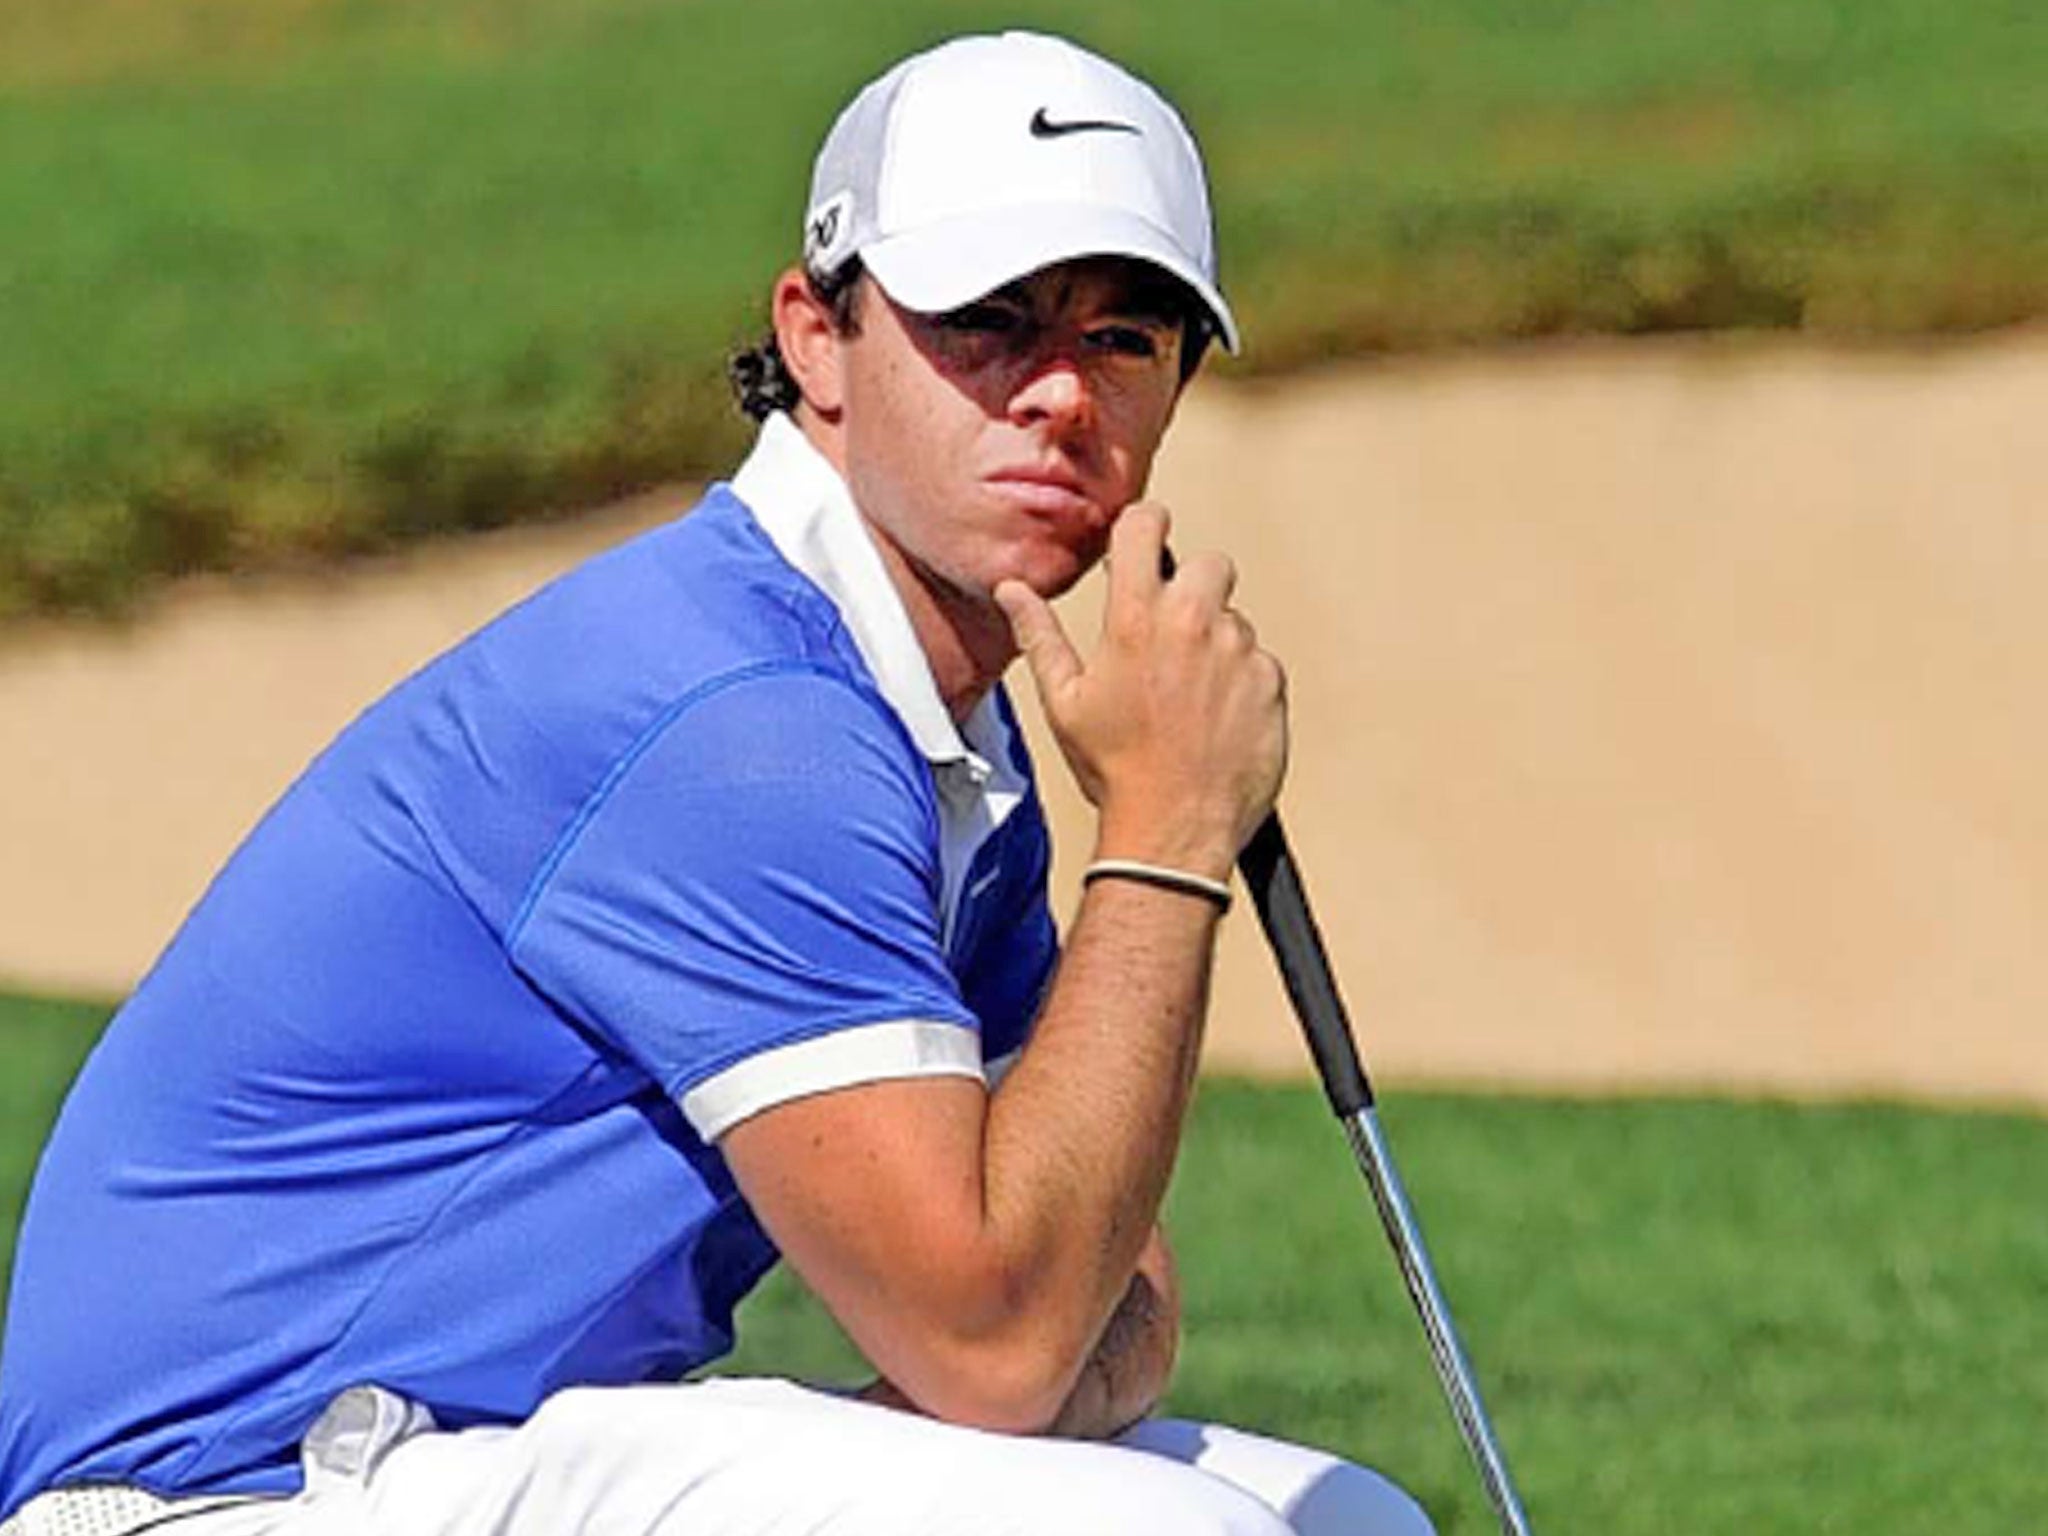 Rory McIlroy has returned to form at just the right time